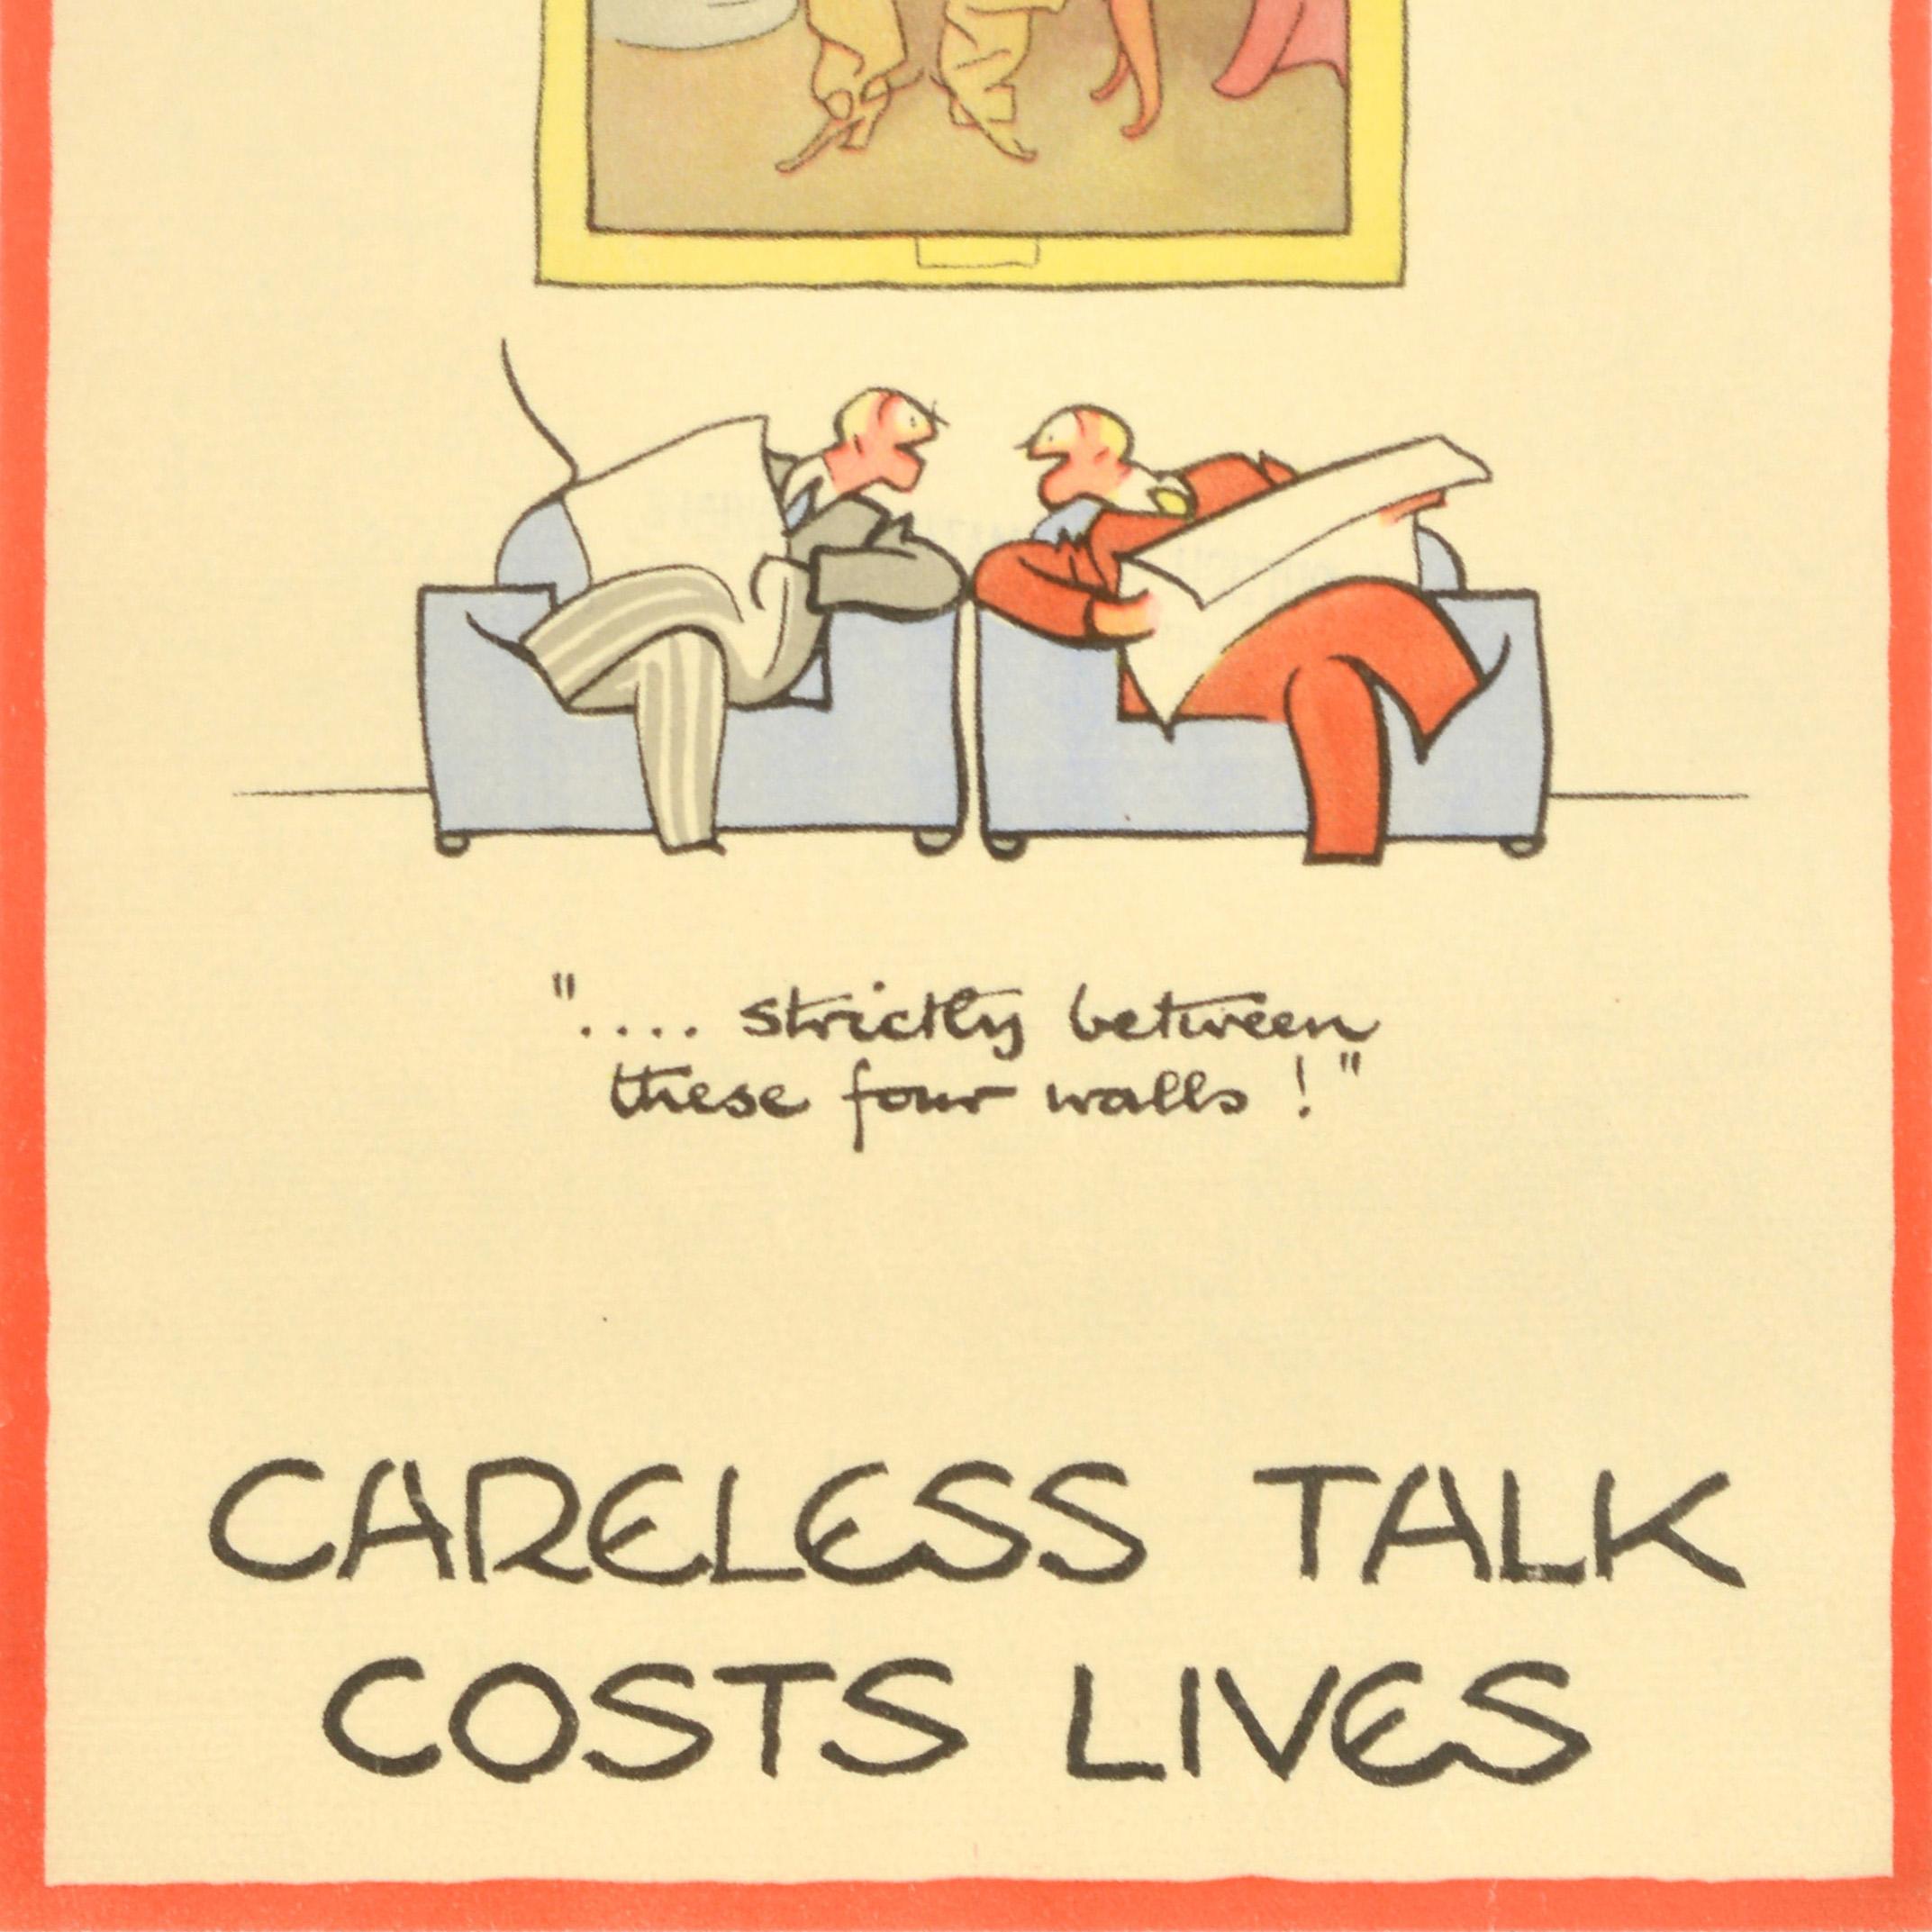 Original vintage World War Two poster by the notable British cartoonist and illustrator, Fougasse (Cyril Kenneth Bird; 1887-1965). This is one of the posters from the popular Careless Talk Costs Lives wartime propaganda series issued by the Ministry